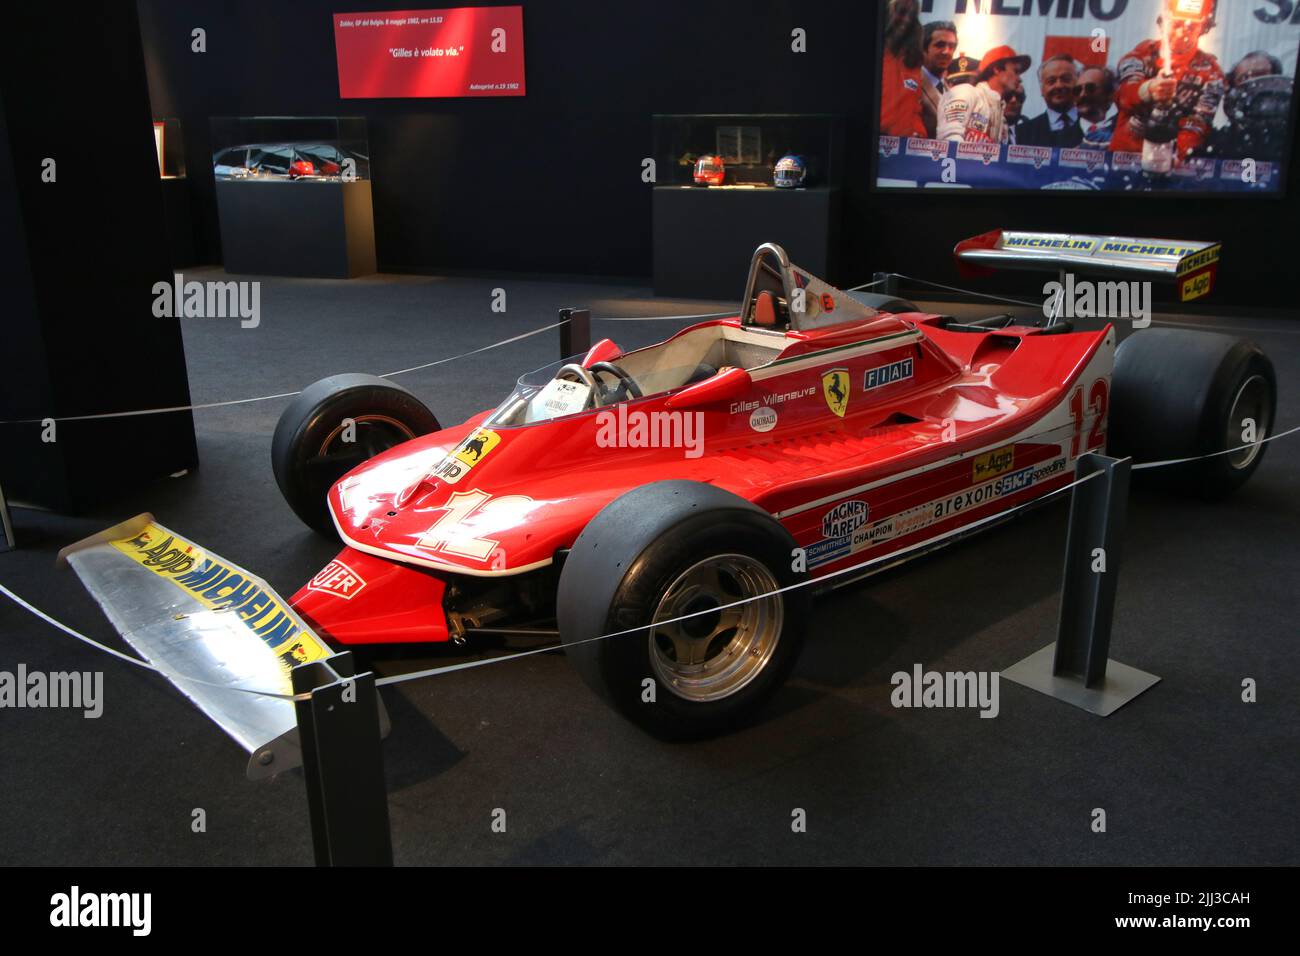 Nonantola (Modena) Italy, July 2022 - Ferrari 312 T4 (1979) vintage car of the canadian driver Gilles Villeneuve in the Giacobazzi Museum and Collecti Stock Photo